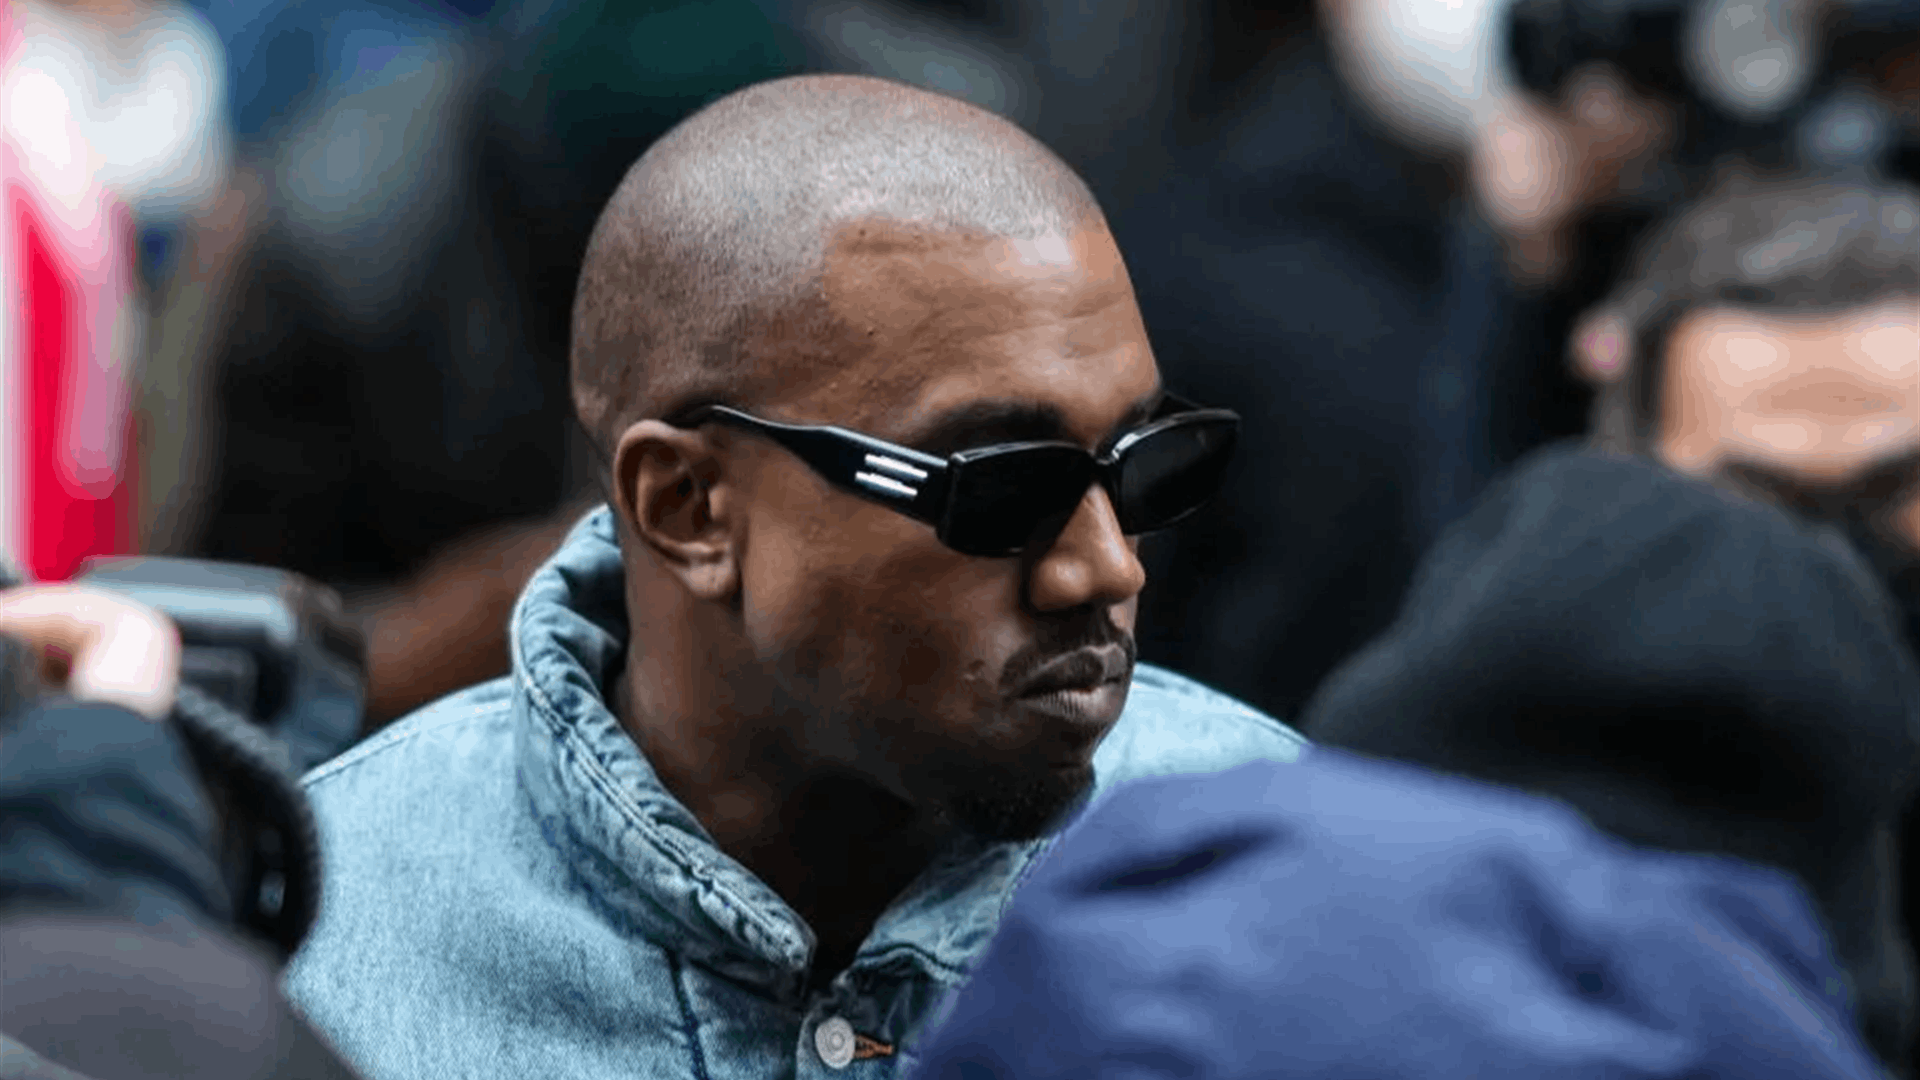 X reinstates Kanye West’s account after Musk banned him last year